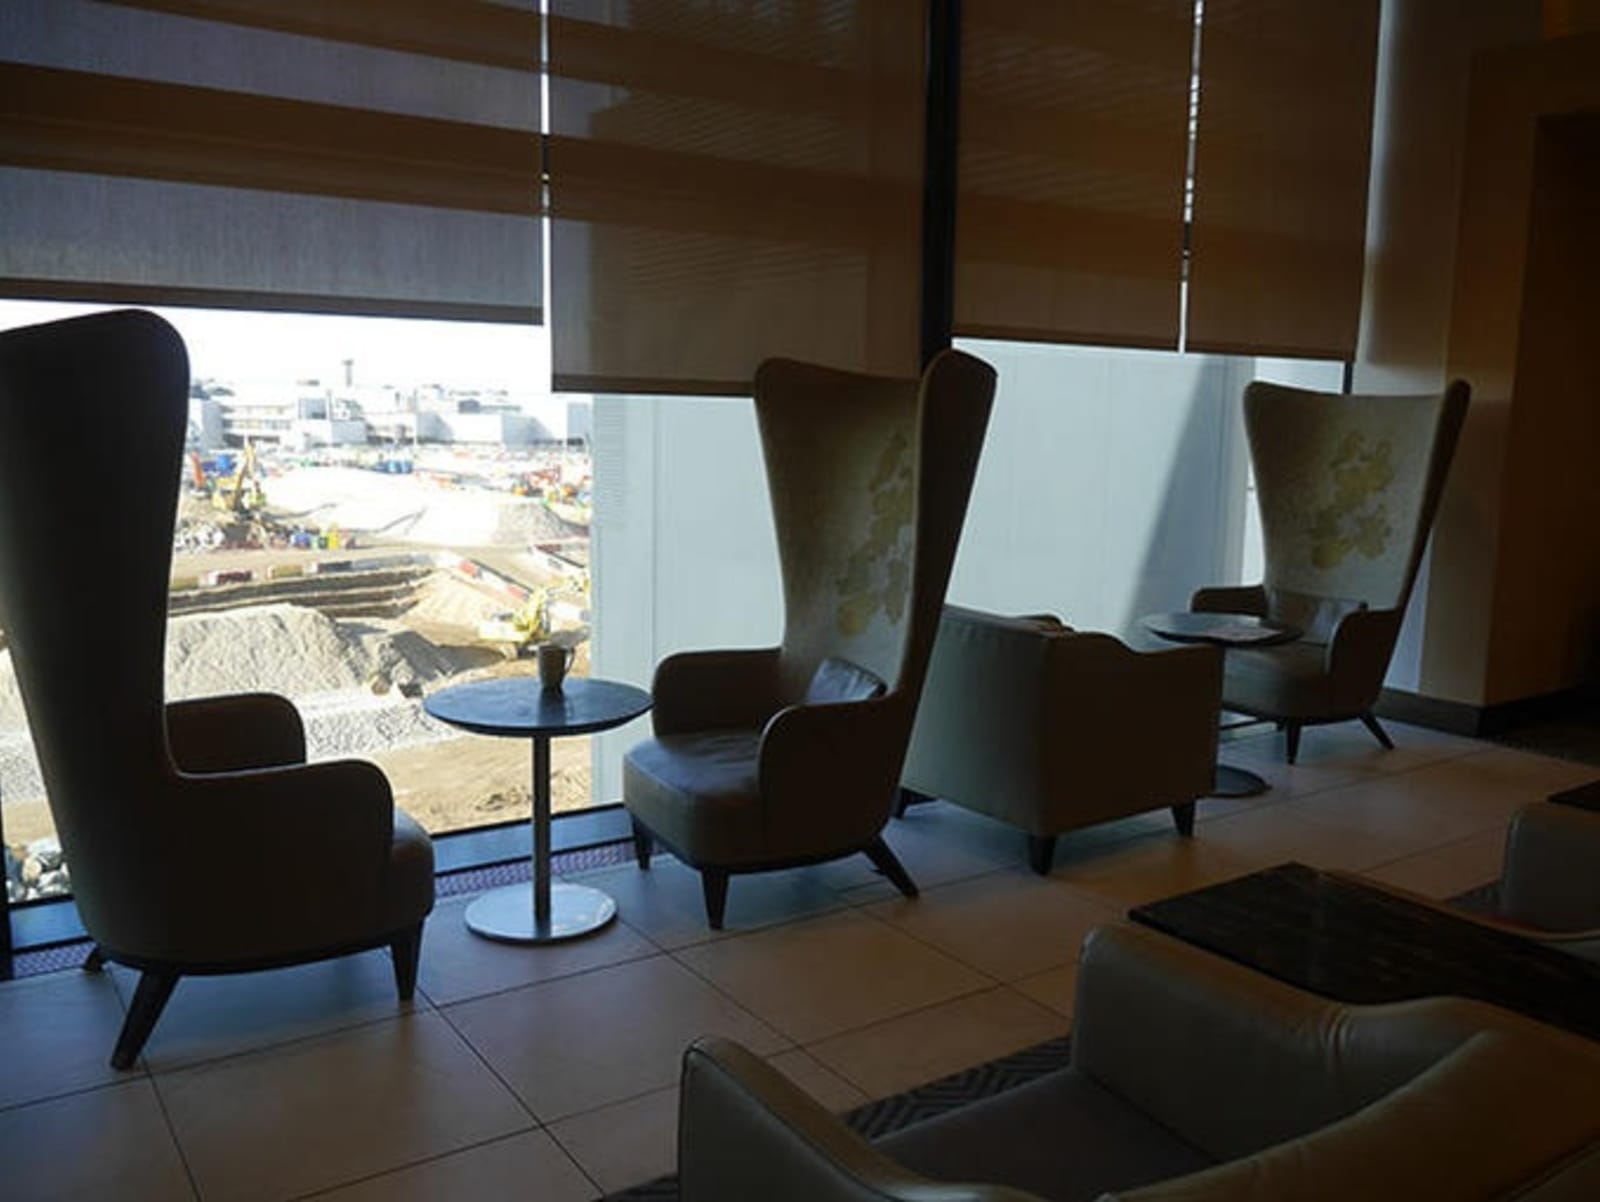 rs-singapore-airlines-lounge-lhr-window-seating.jpg